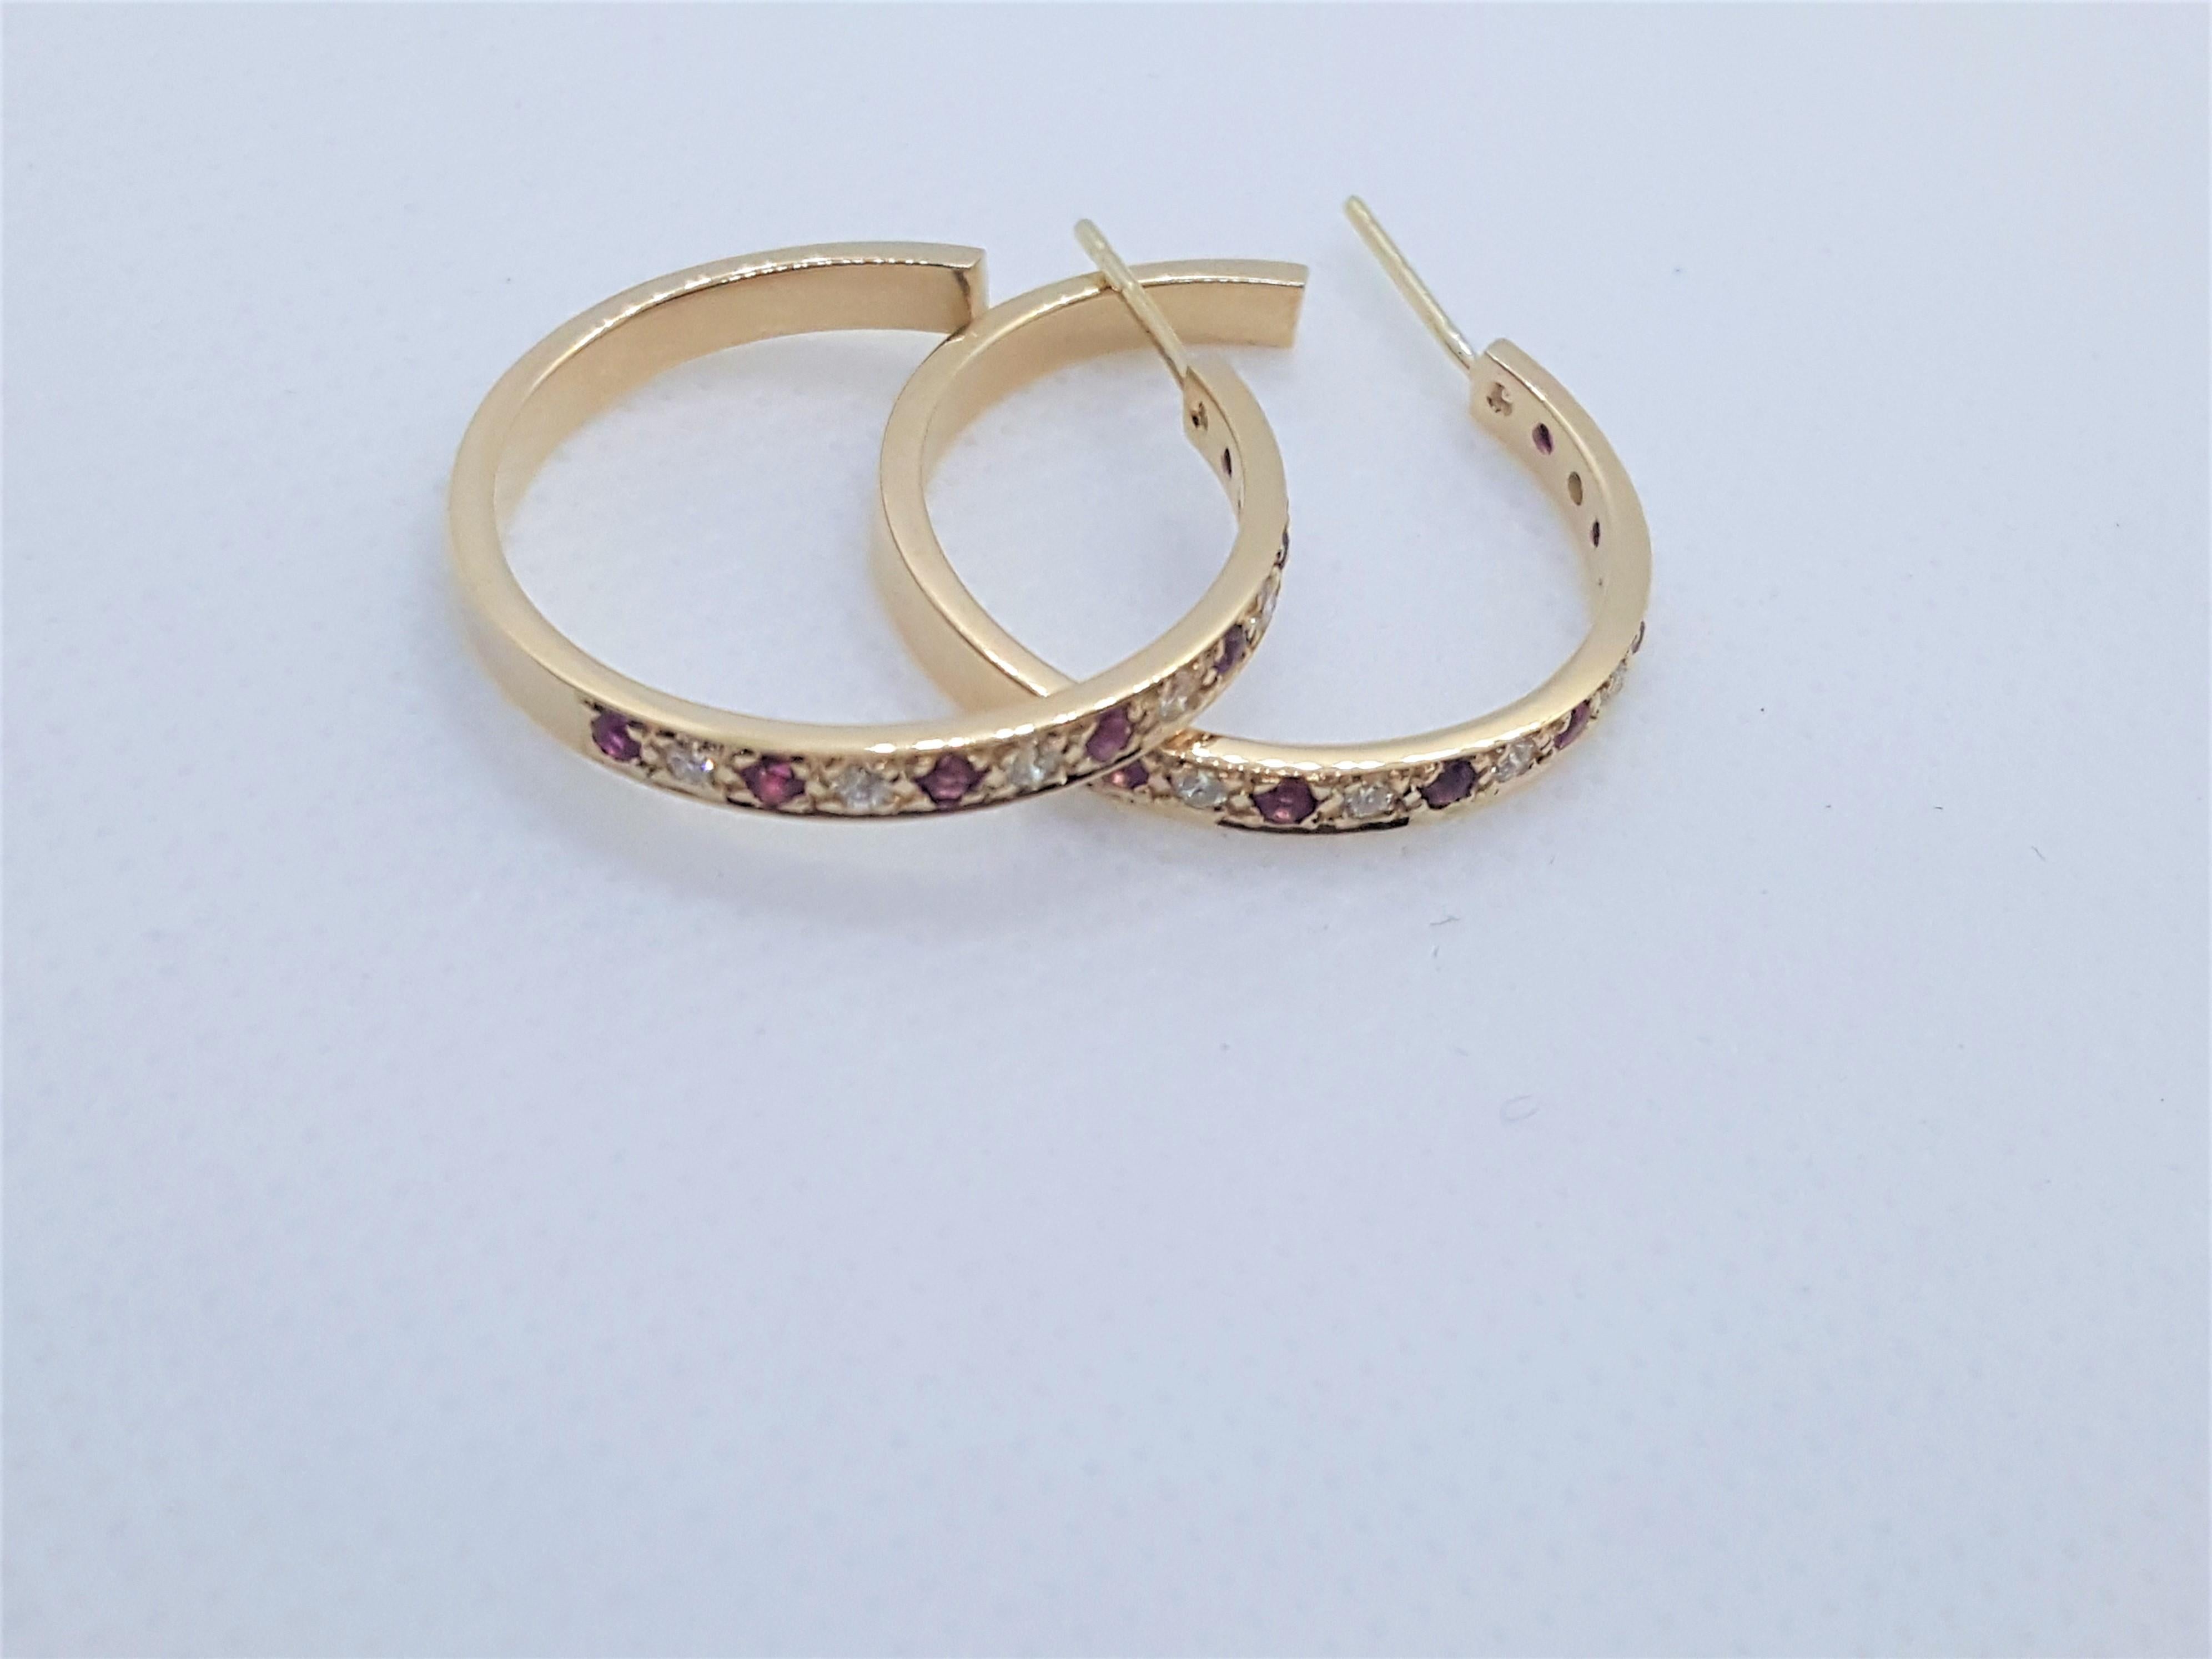 Timeless 14kt yellow gold hoops with 14 bead set round brilliant diamonds of approximately .15cttw and 14 round fine rich rubies of approximately .20cttw. The diamonds are g/h in color and SI in clarity. The hoops are 25mm in diameter, 3mm wide, 6.3